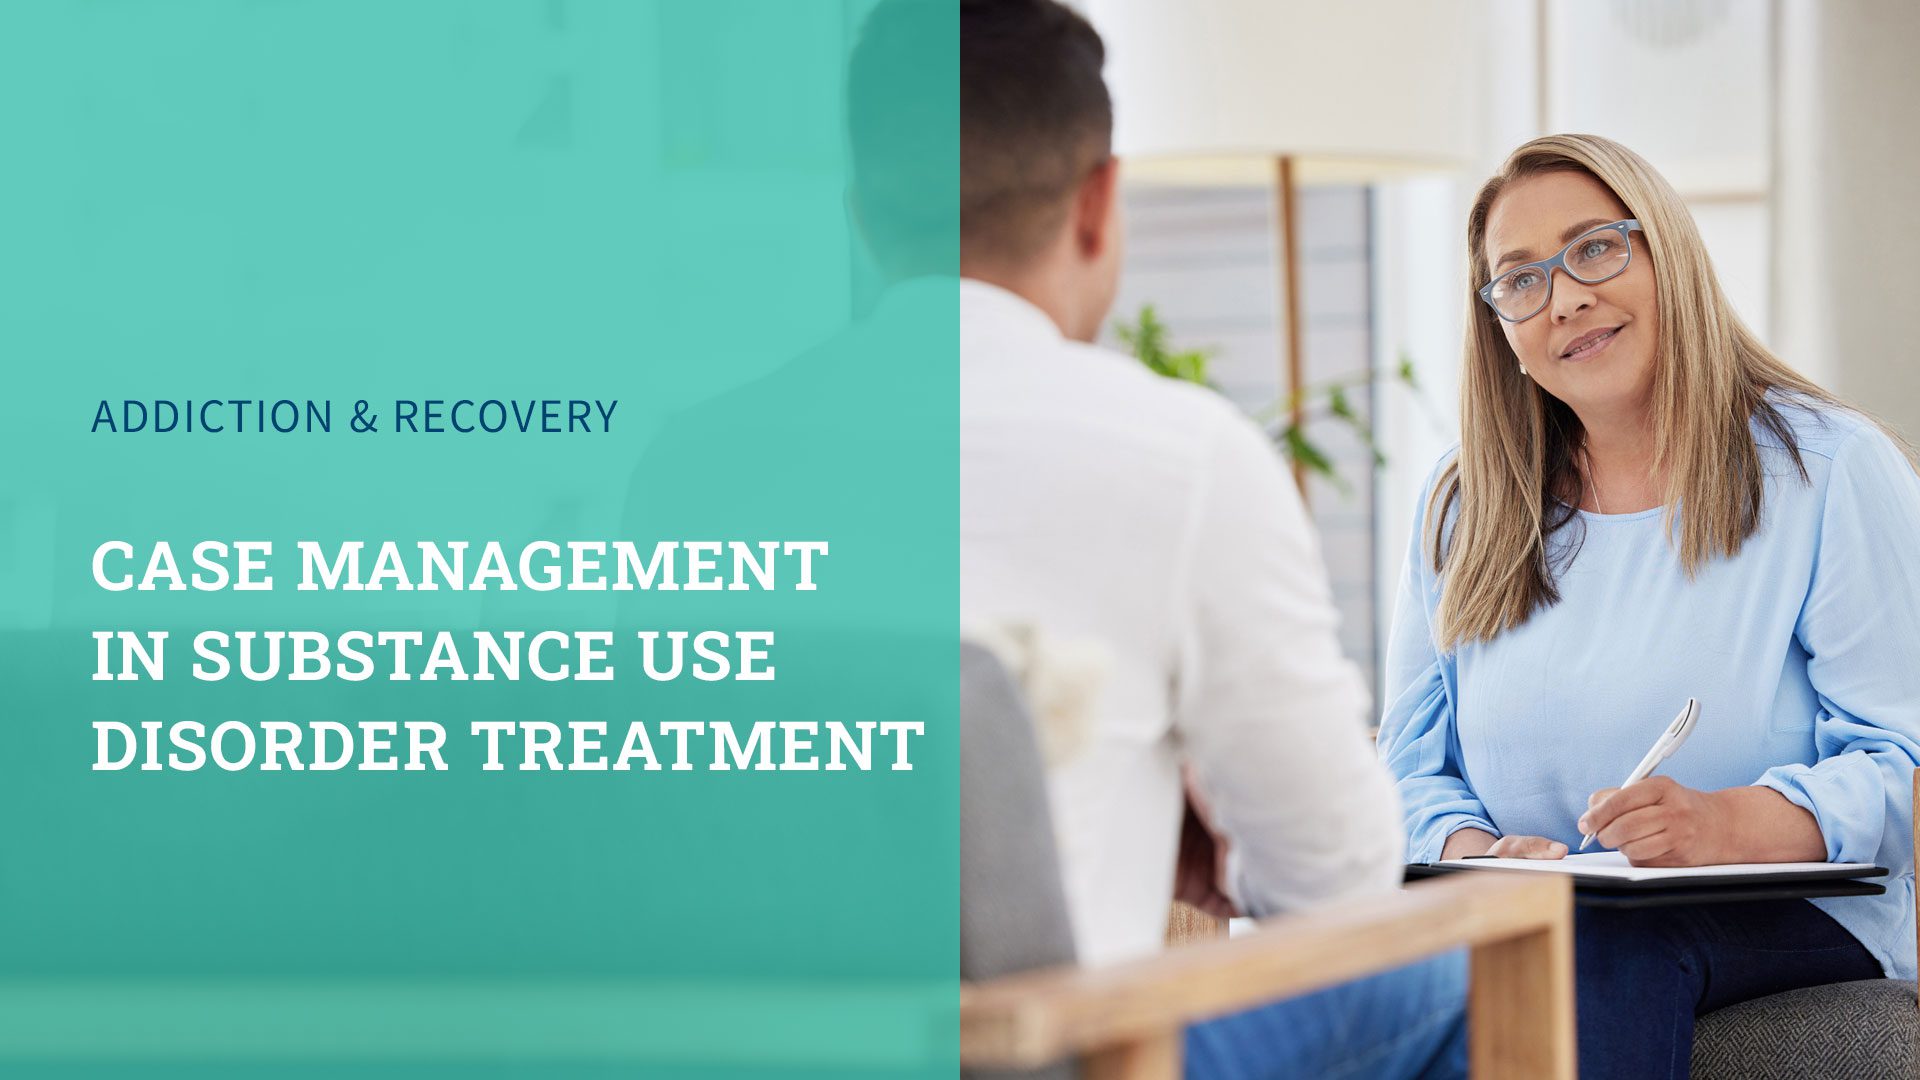 Case Management in Substance Use Disorder Treatment